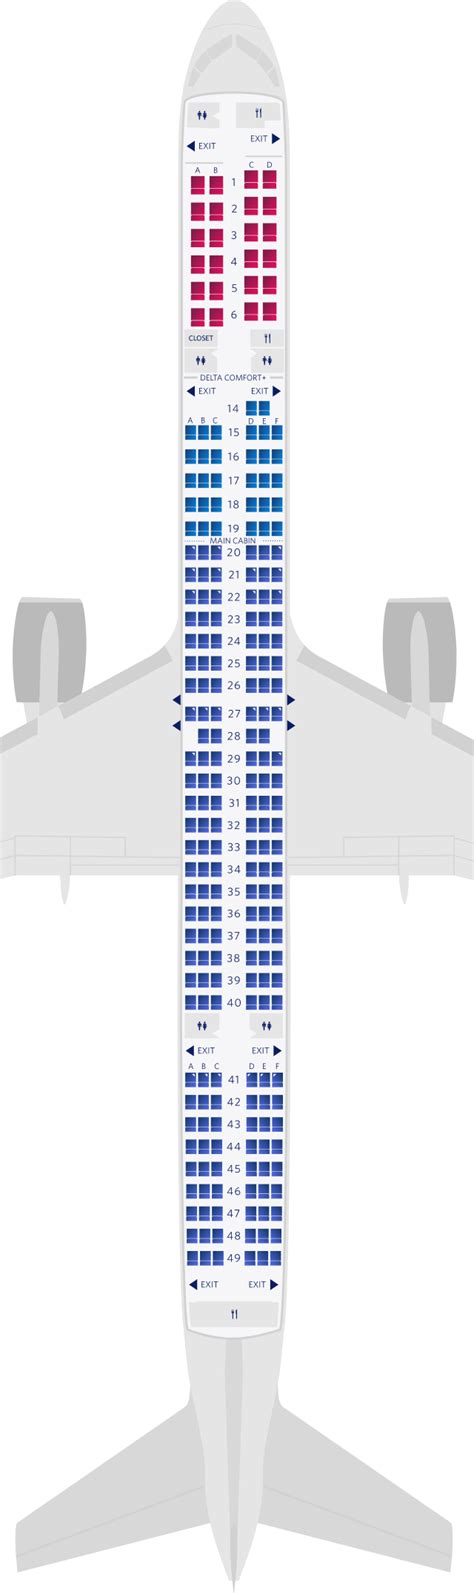 For your next Delta flight, use this seating chart to get the most comfortable seats, legroom, and recline on . ... Delta Seat Maps. Overview; Planes & Seat Maps. Airbus A220-100 (CS1) Airbus A319 (319) ... Boeing 757-300 (75Y) Boeing 767-300ER (76H/76Z) Layout 3;. 